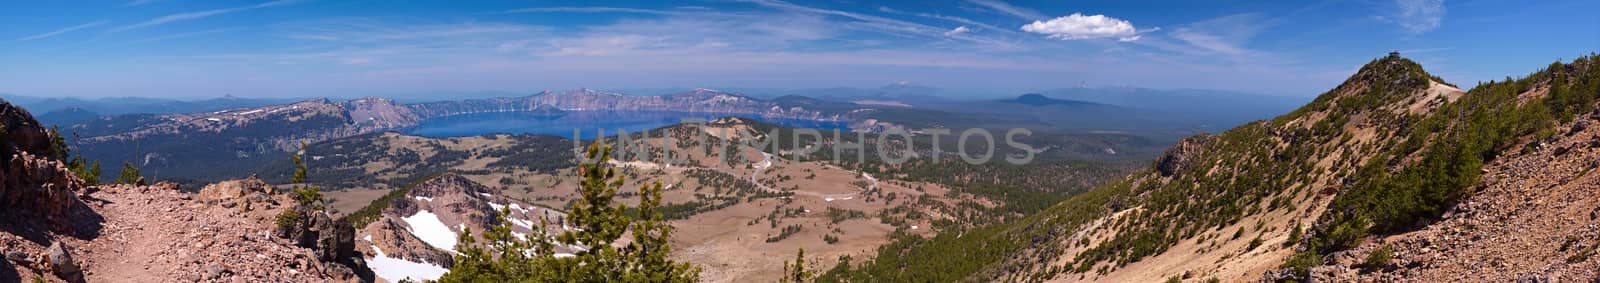 113 megapixel panorama of Crater Lake by LoonChild